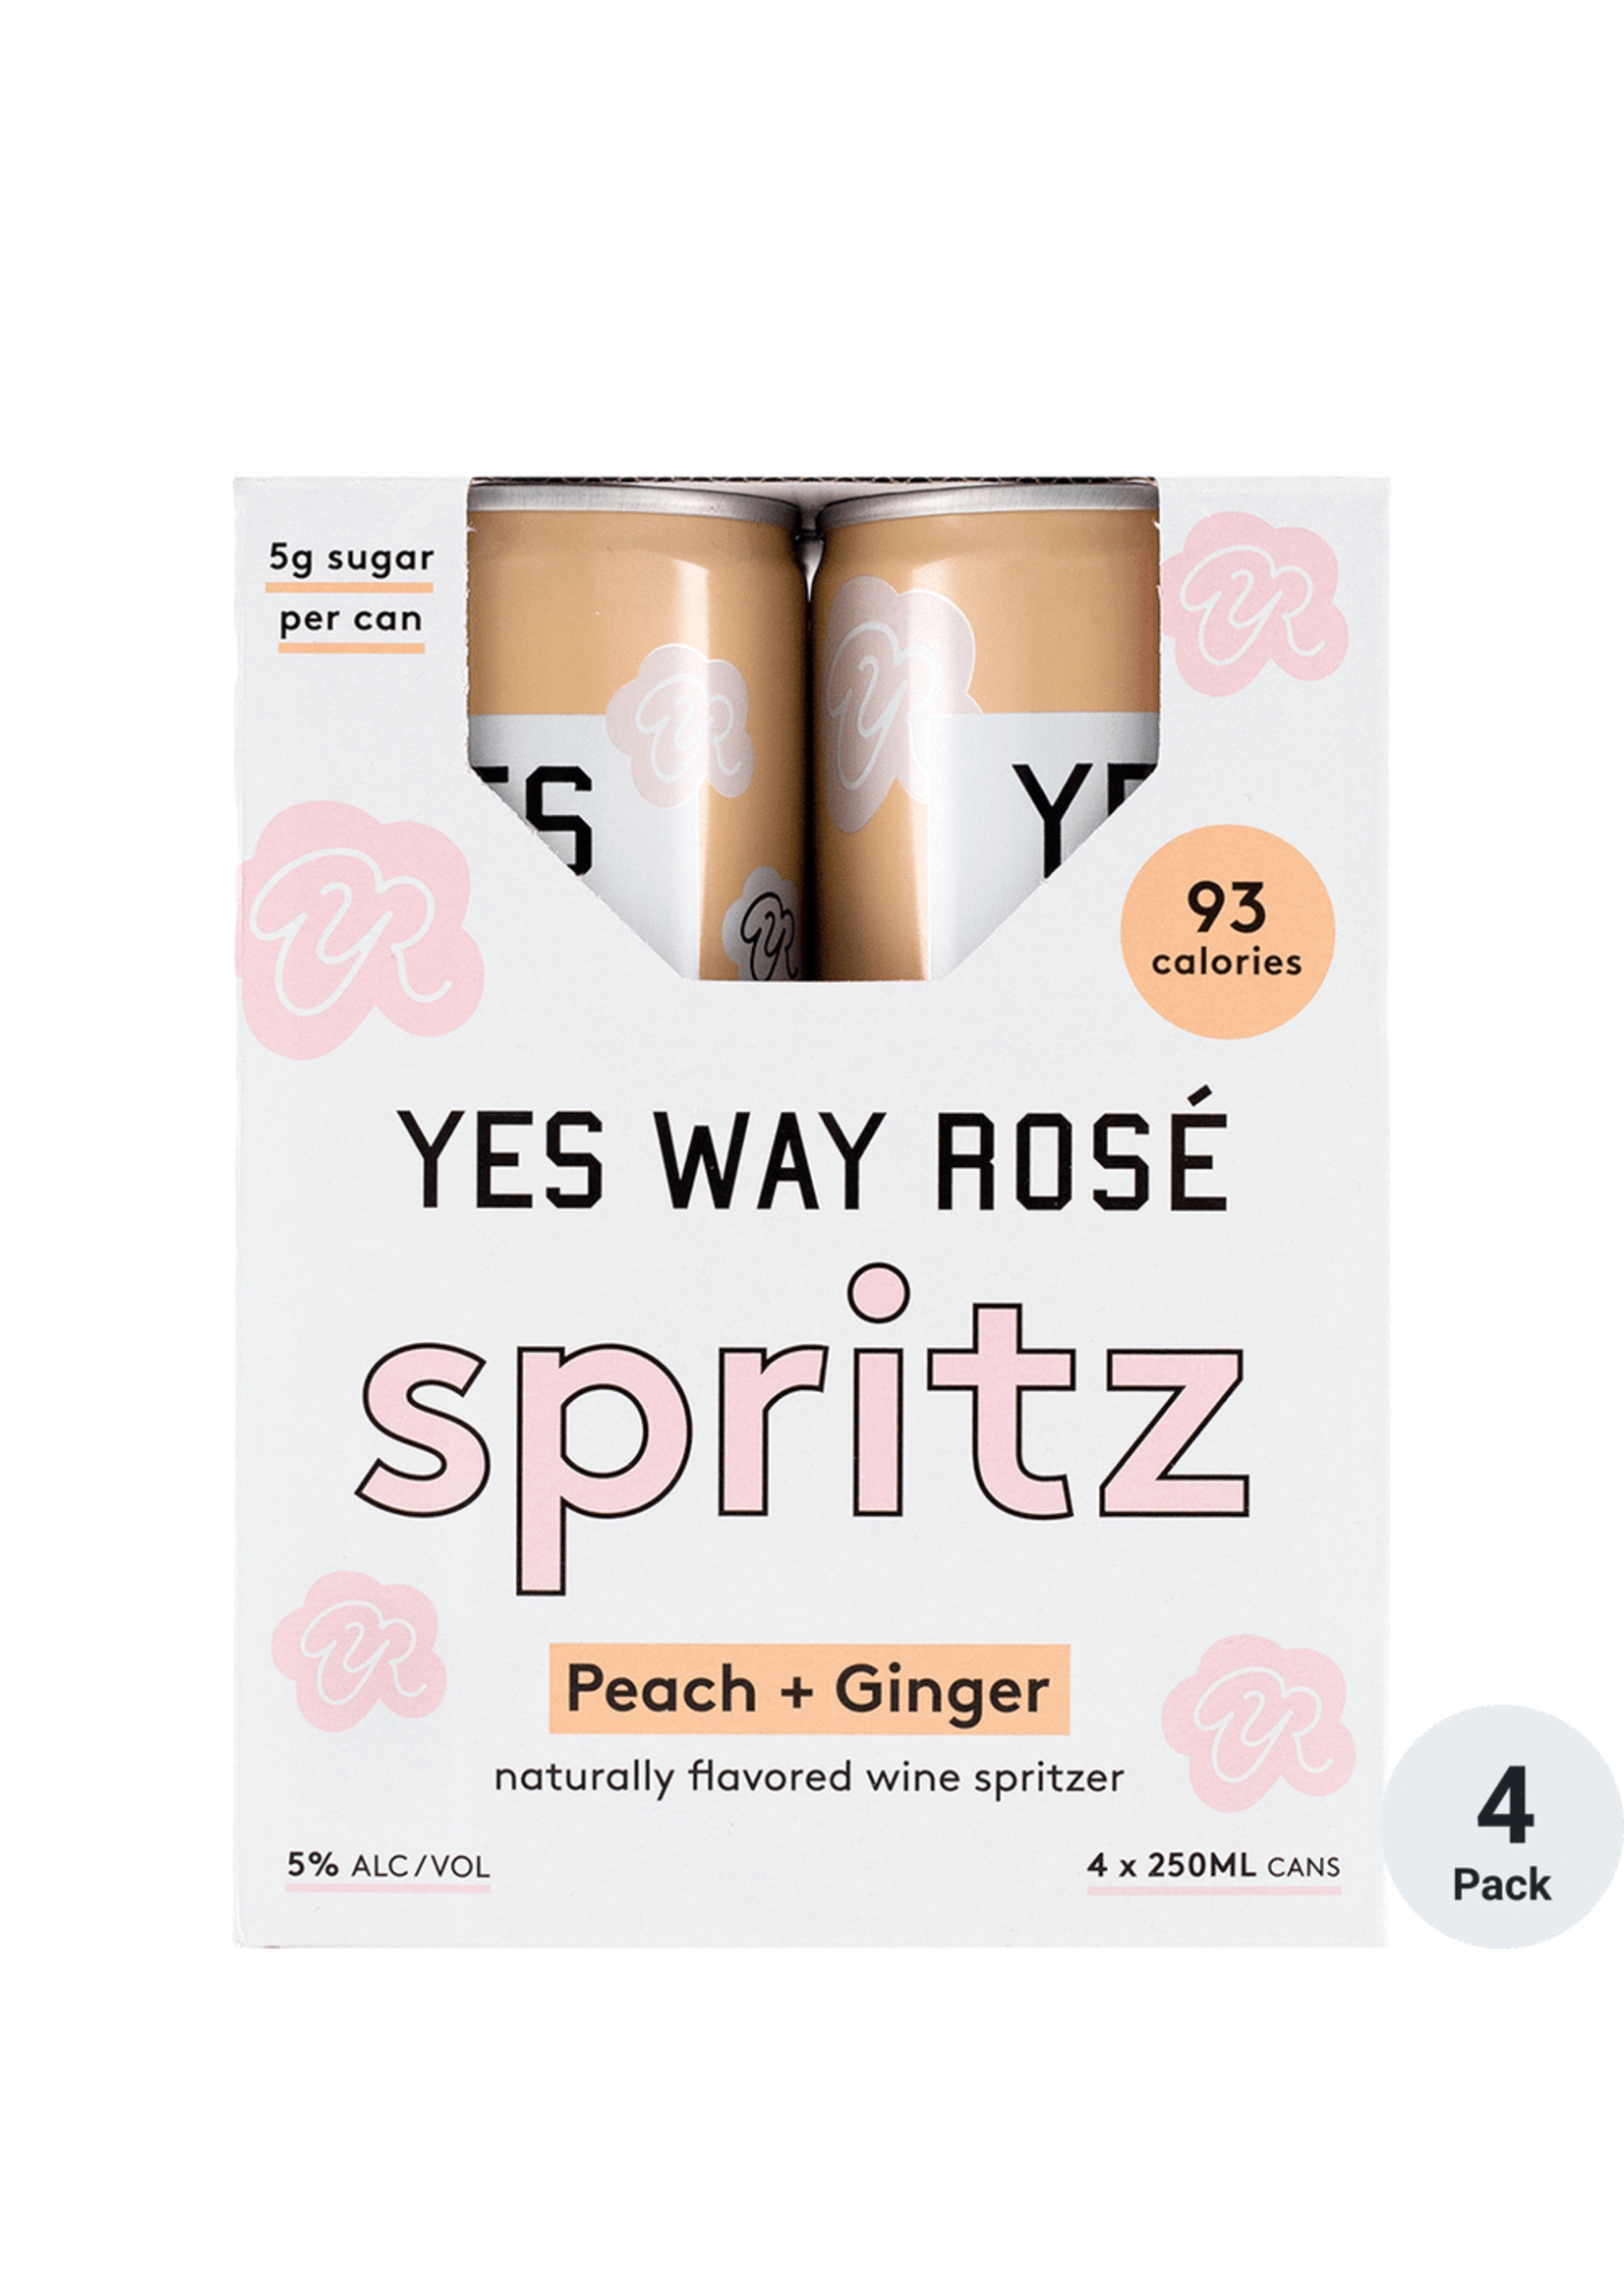 Yes Way Rose Spritz Peach Ginger 4pk 12oz Cans